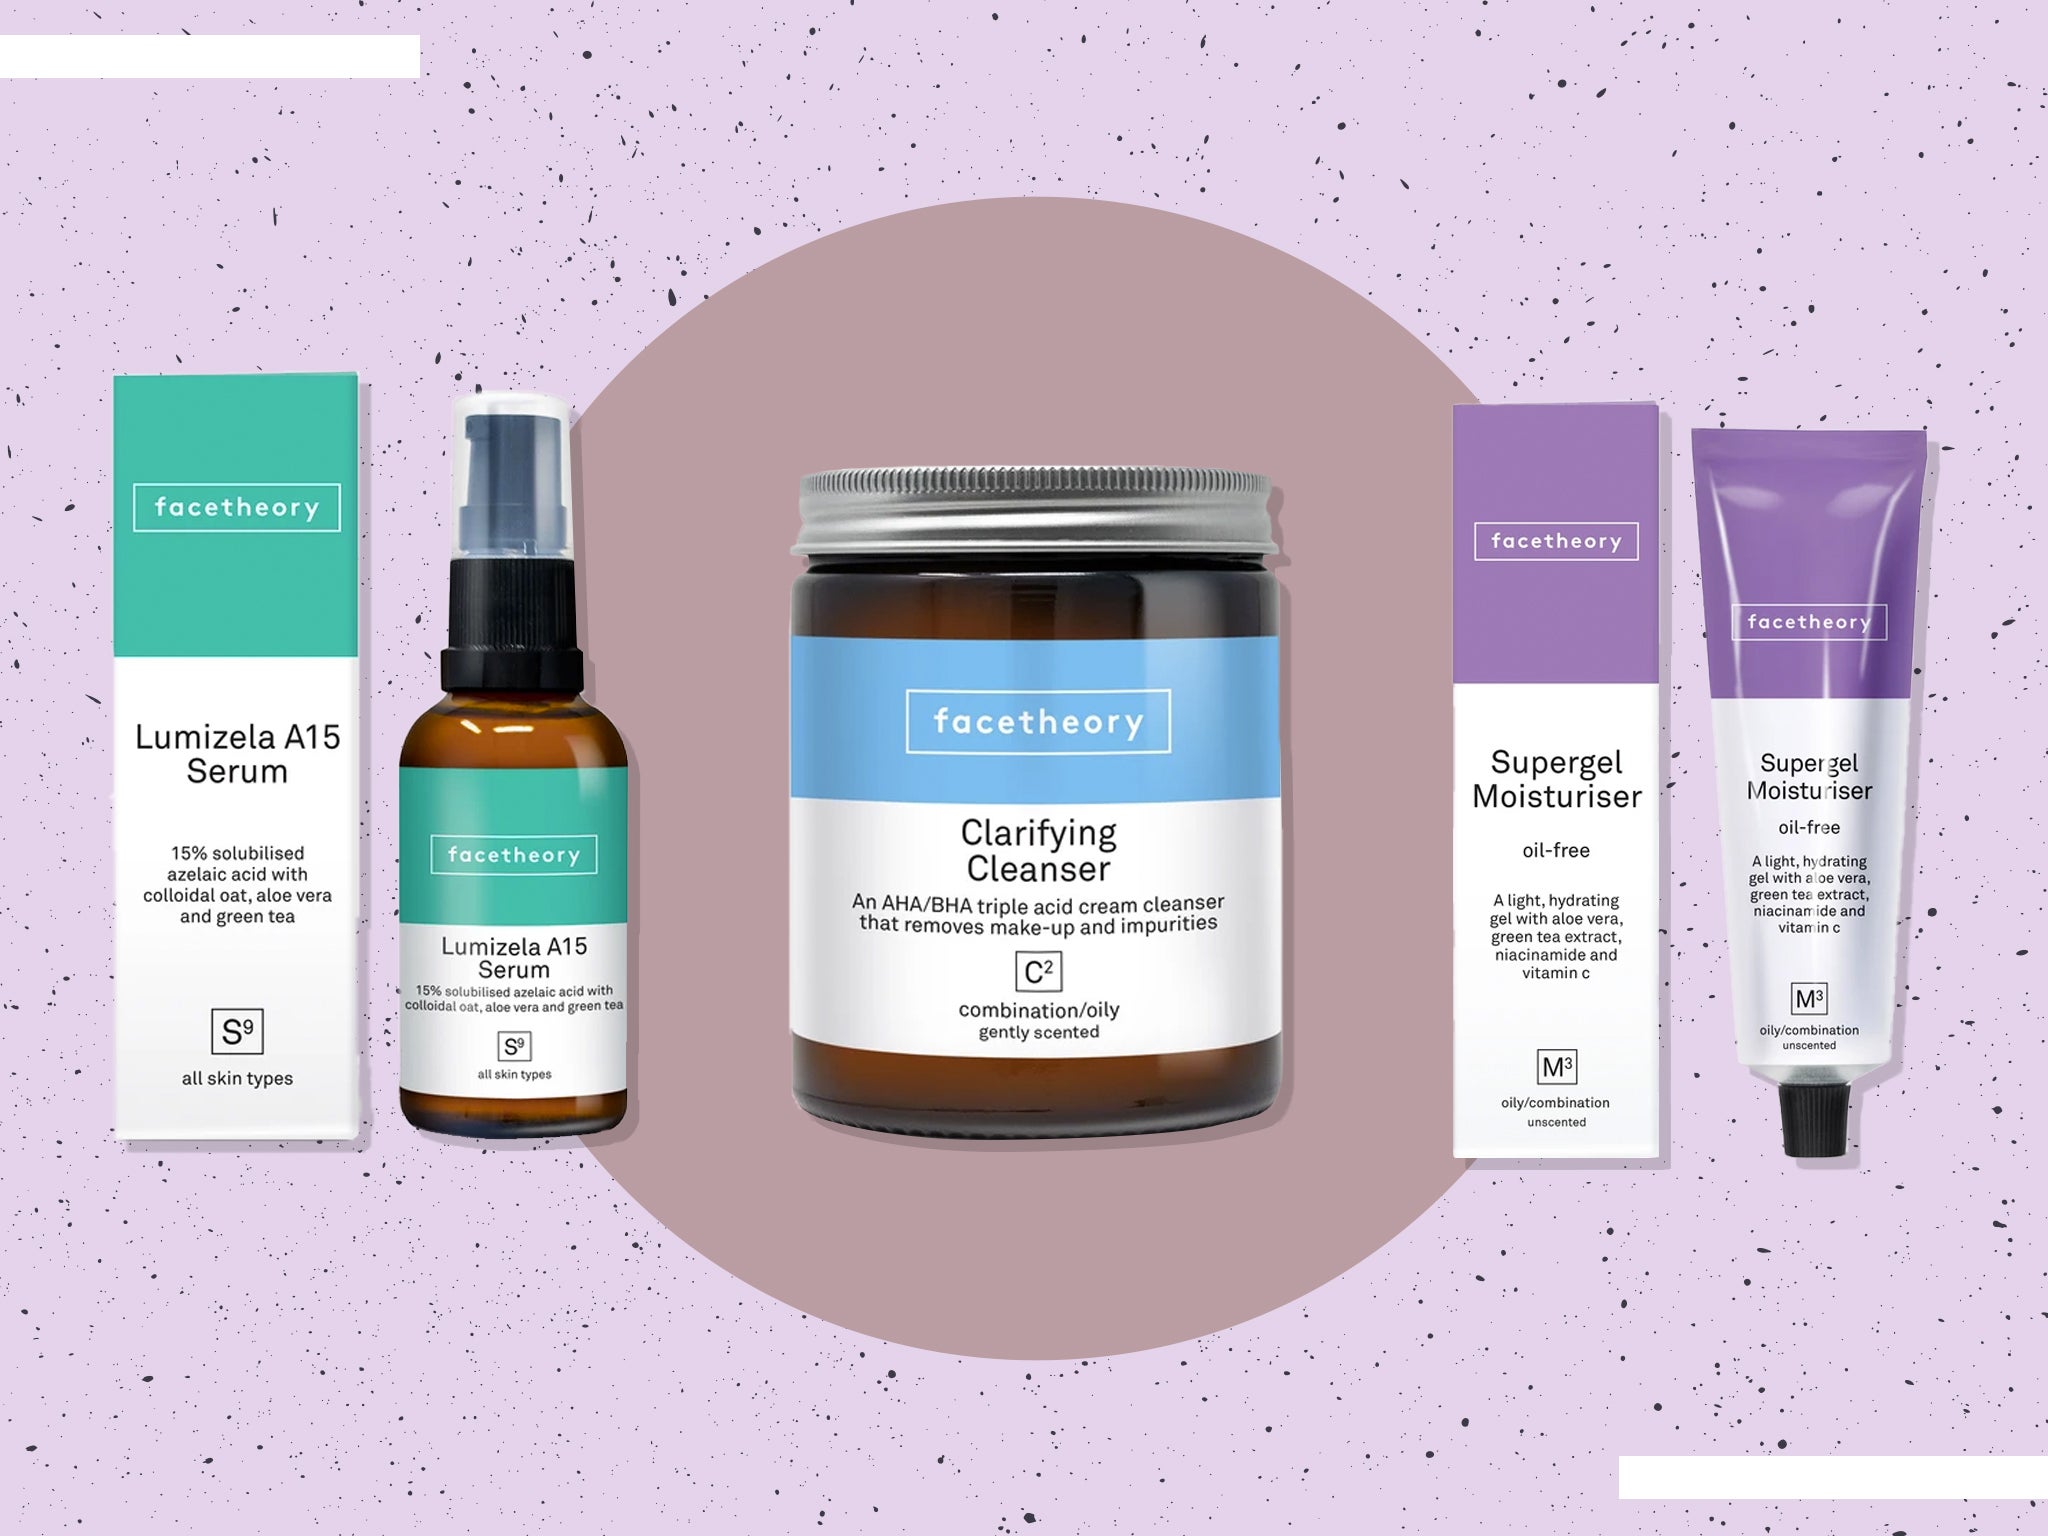 FaceTheory offers a helpful questionnaire for finding the best products to use in your skincare routine